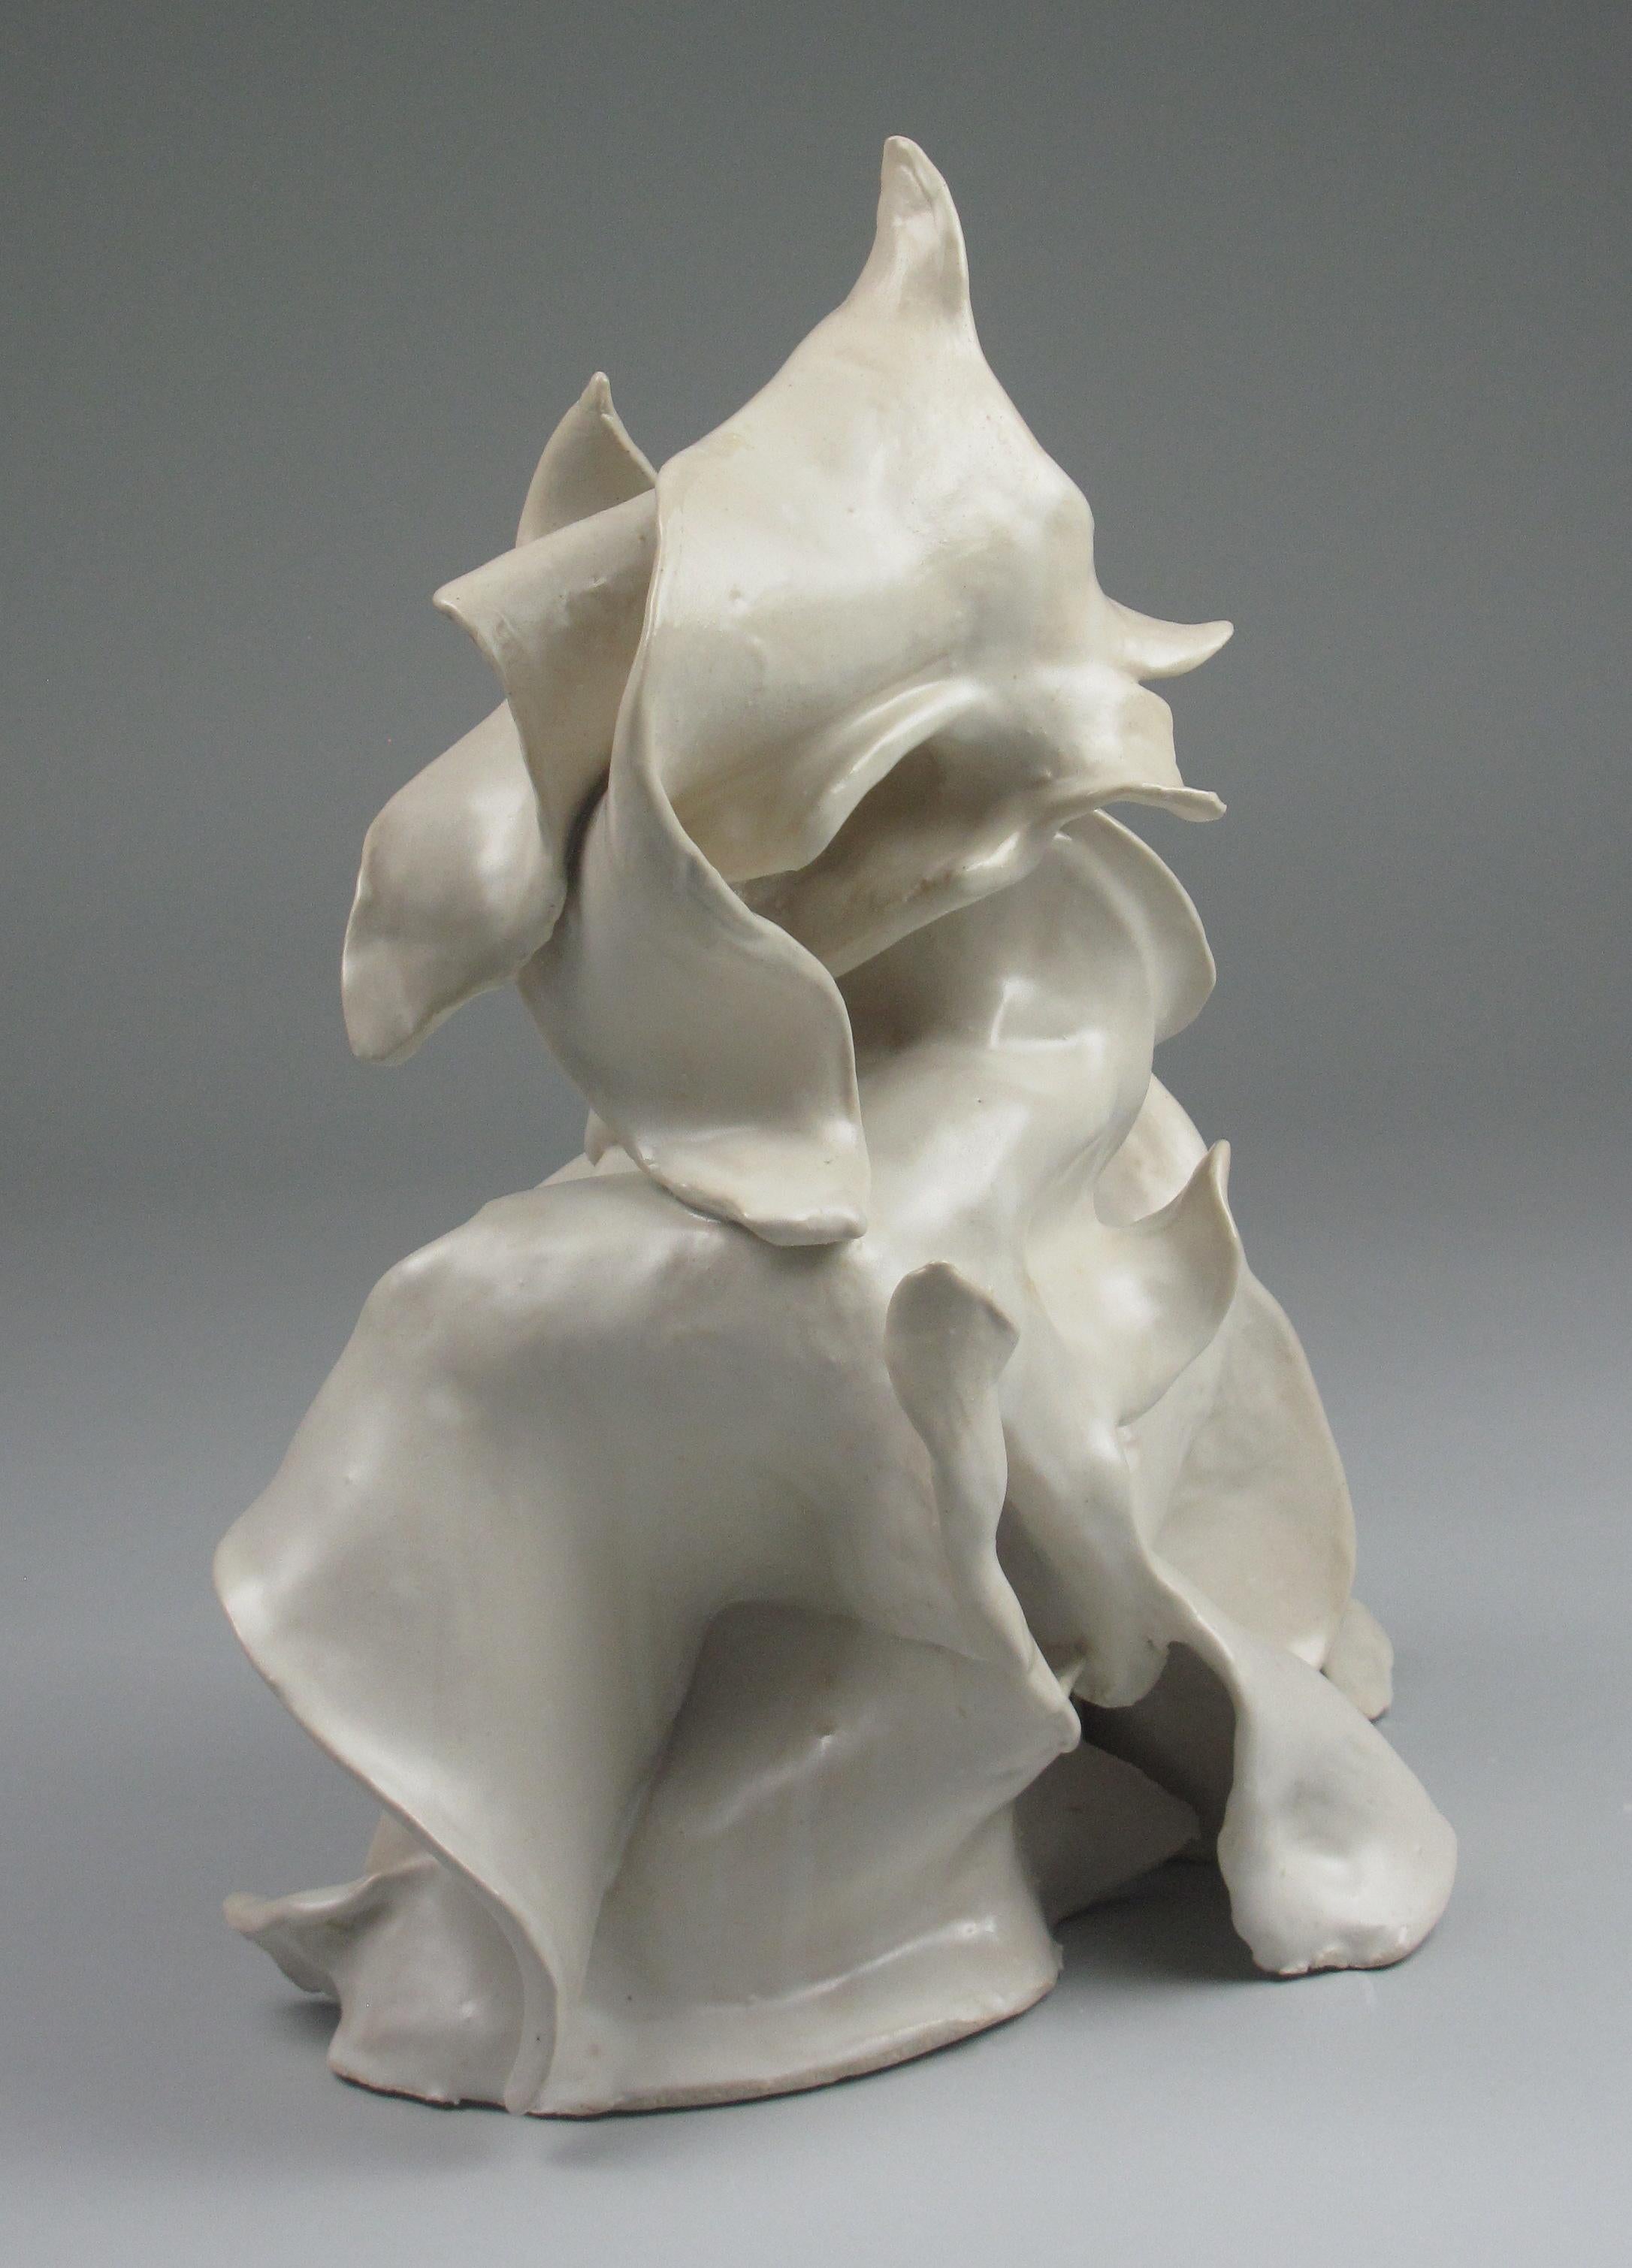 abstract ceramic sculpture